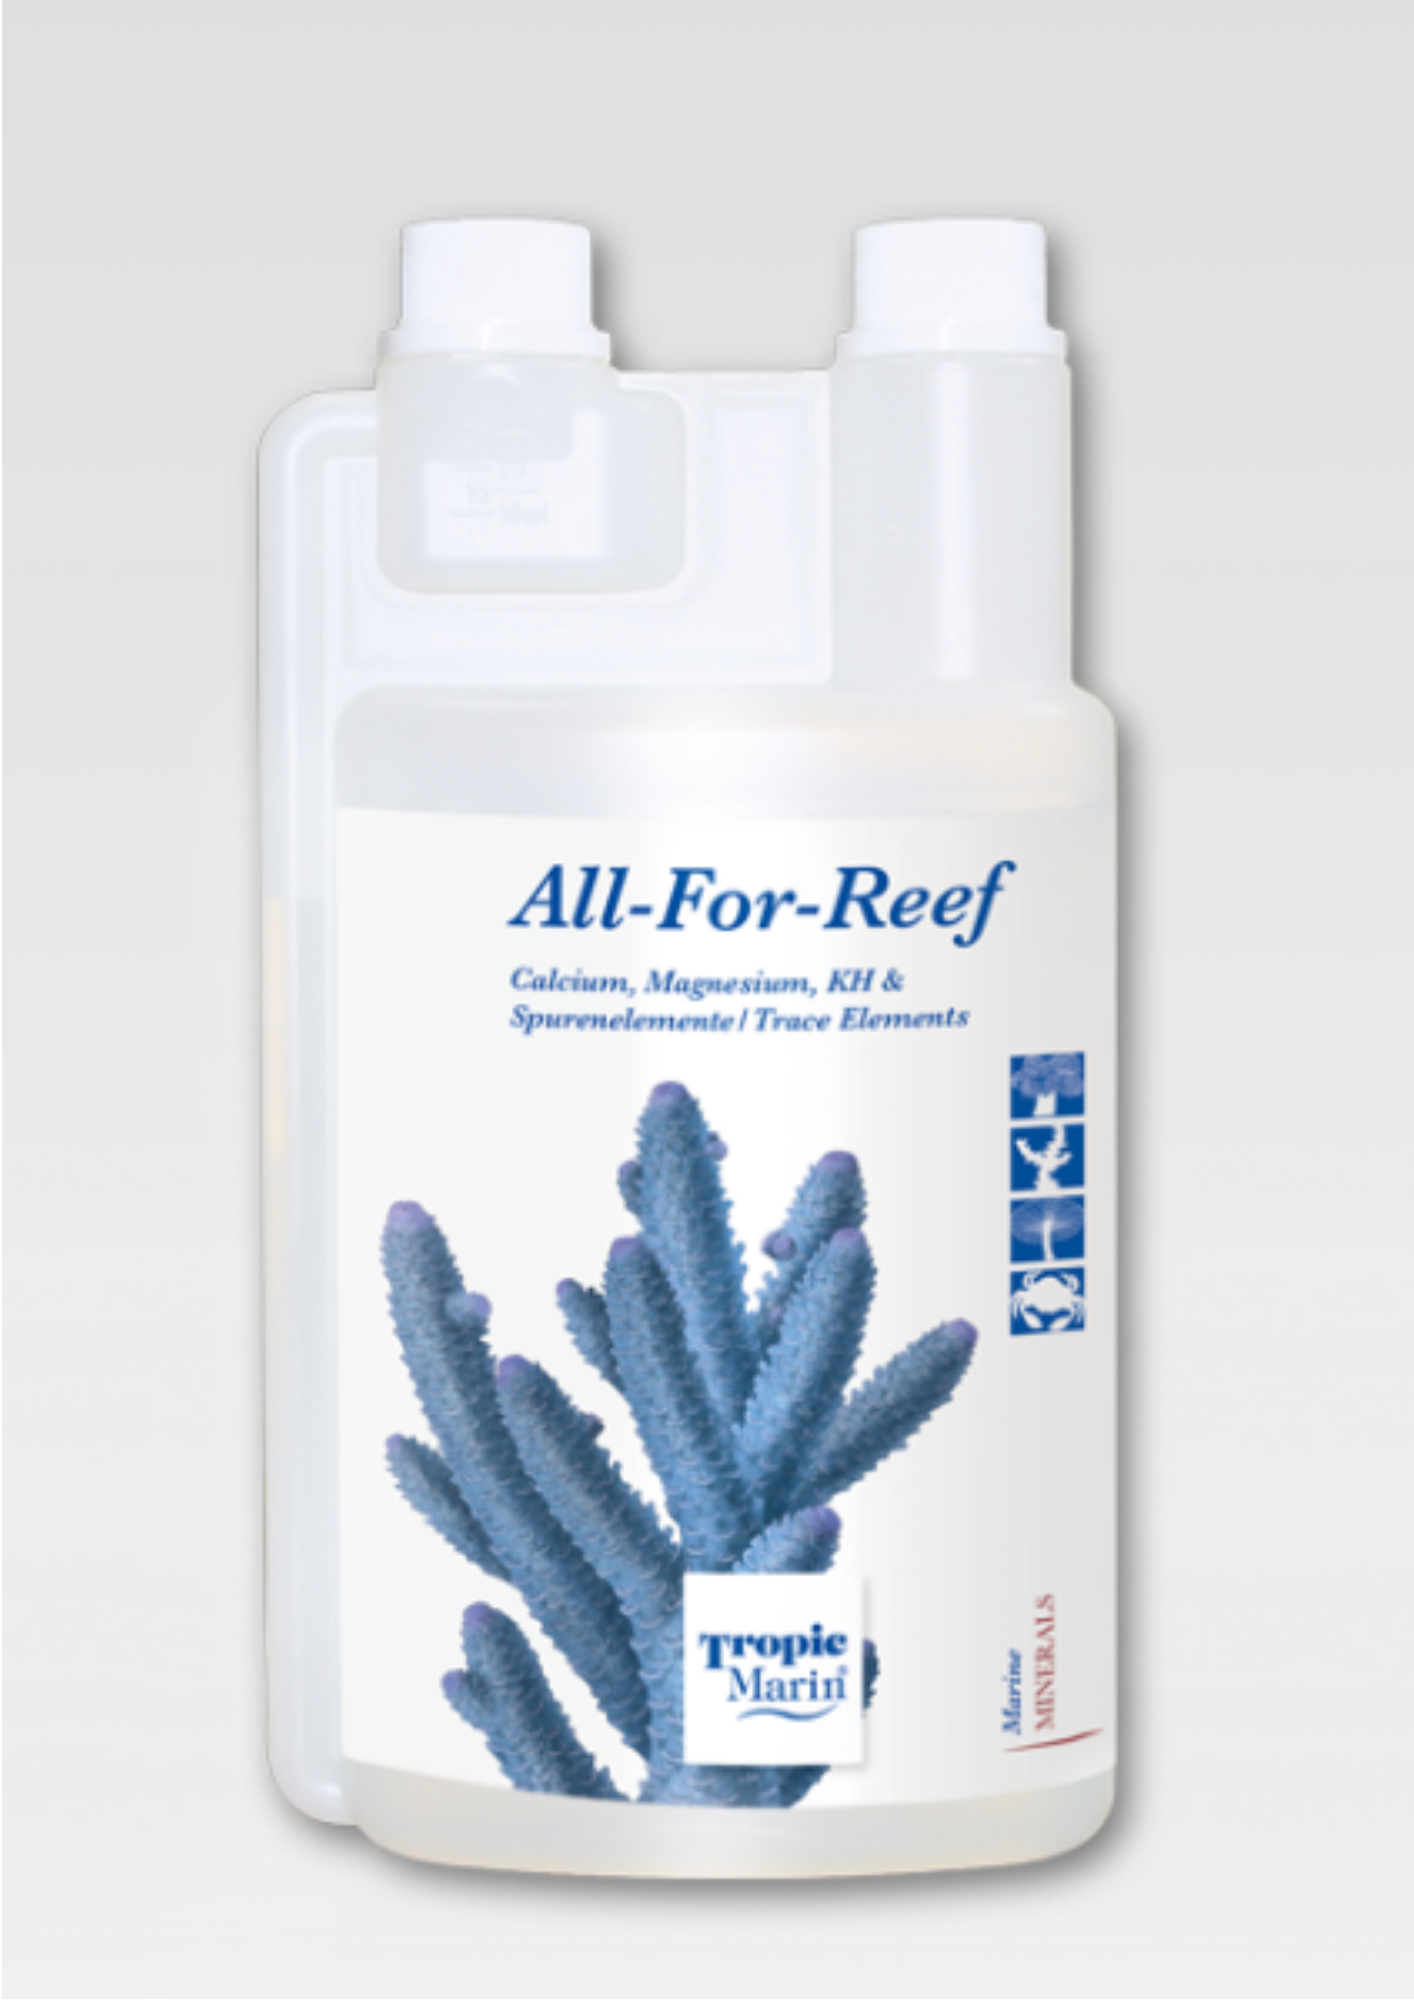 All-For-Reef